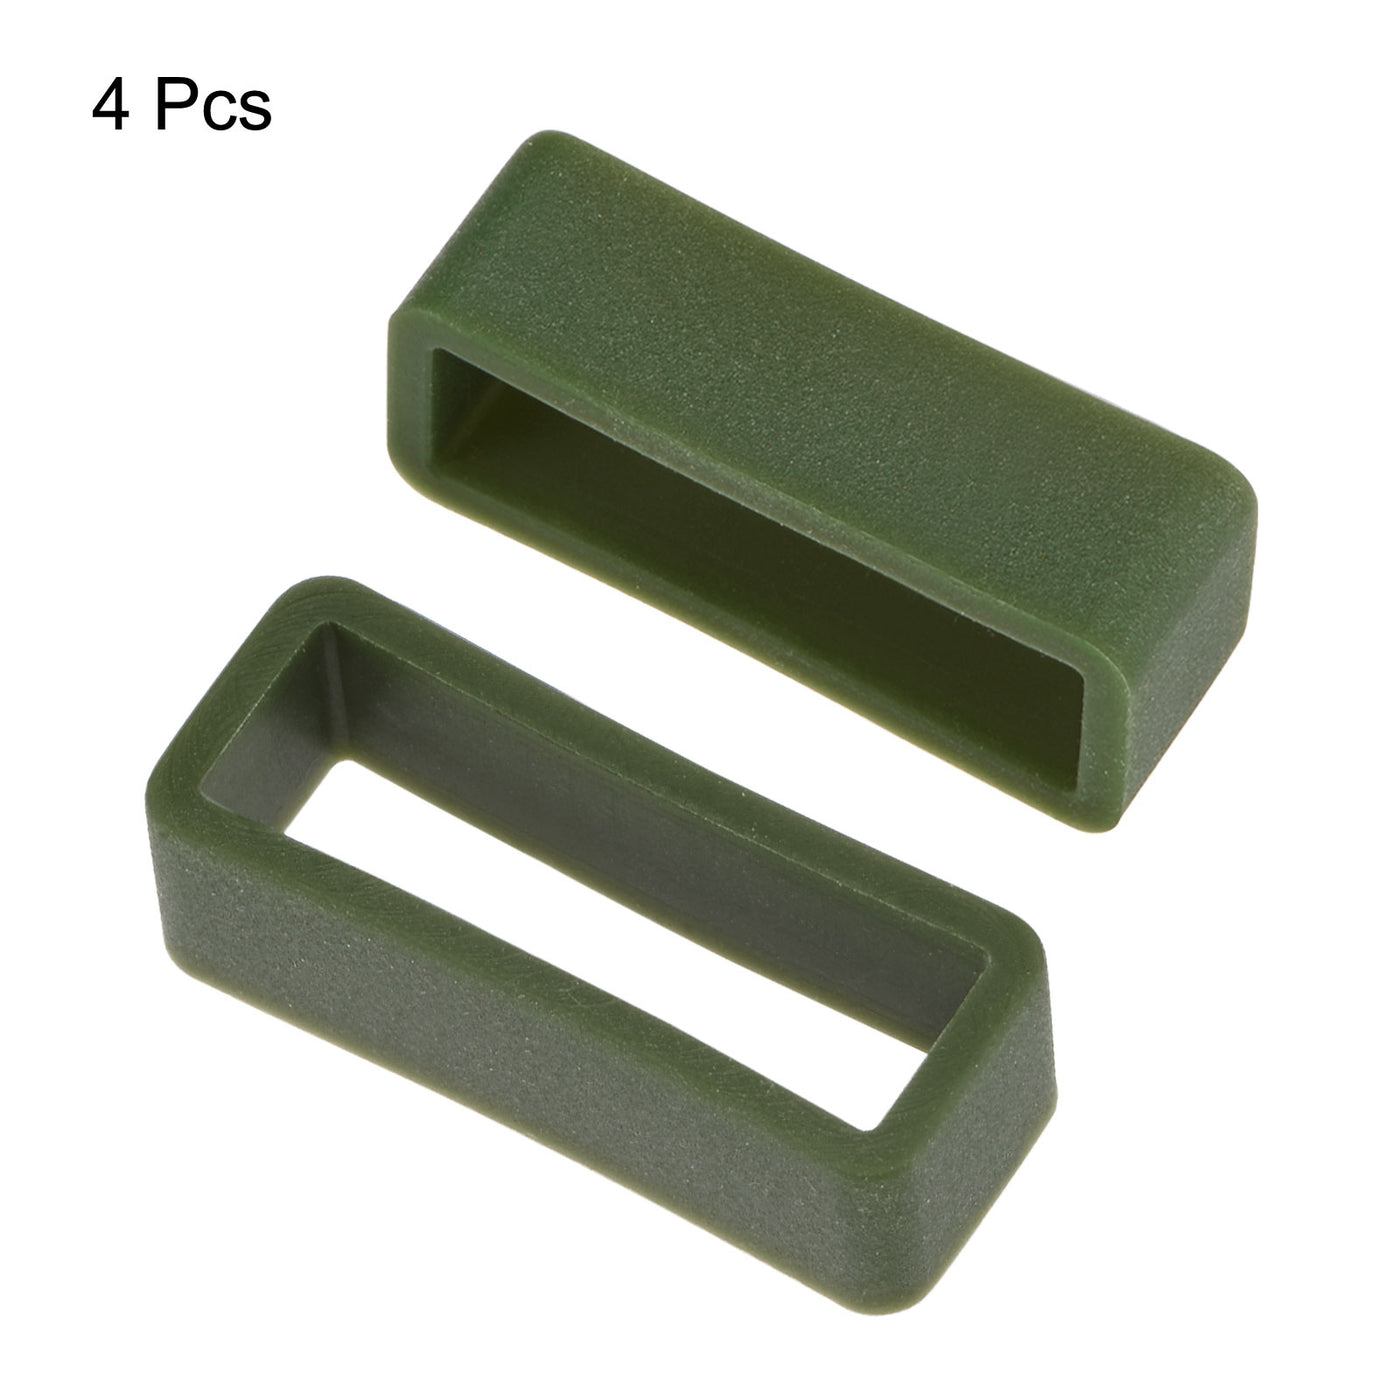 Uxcell Uxcell Watch Band Strap Loops Silicone for 22mm Width Watch Band, Dark Green 4 Pcs